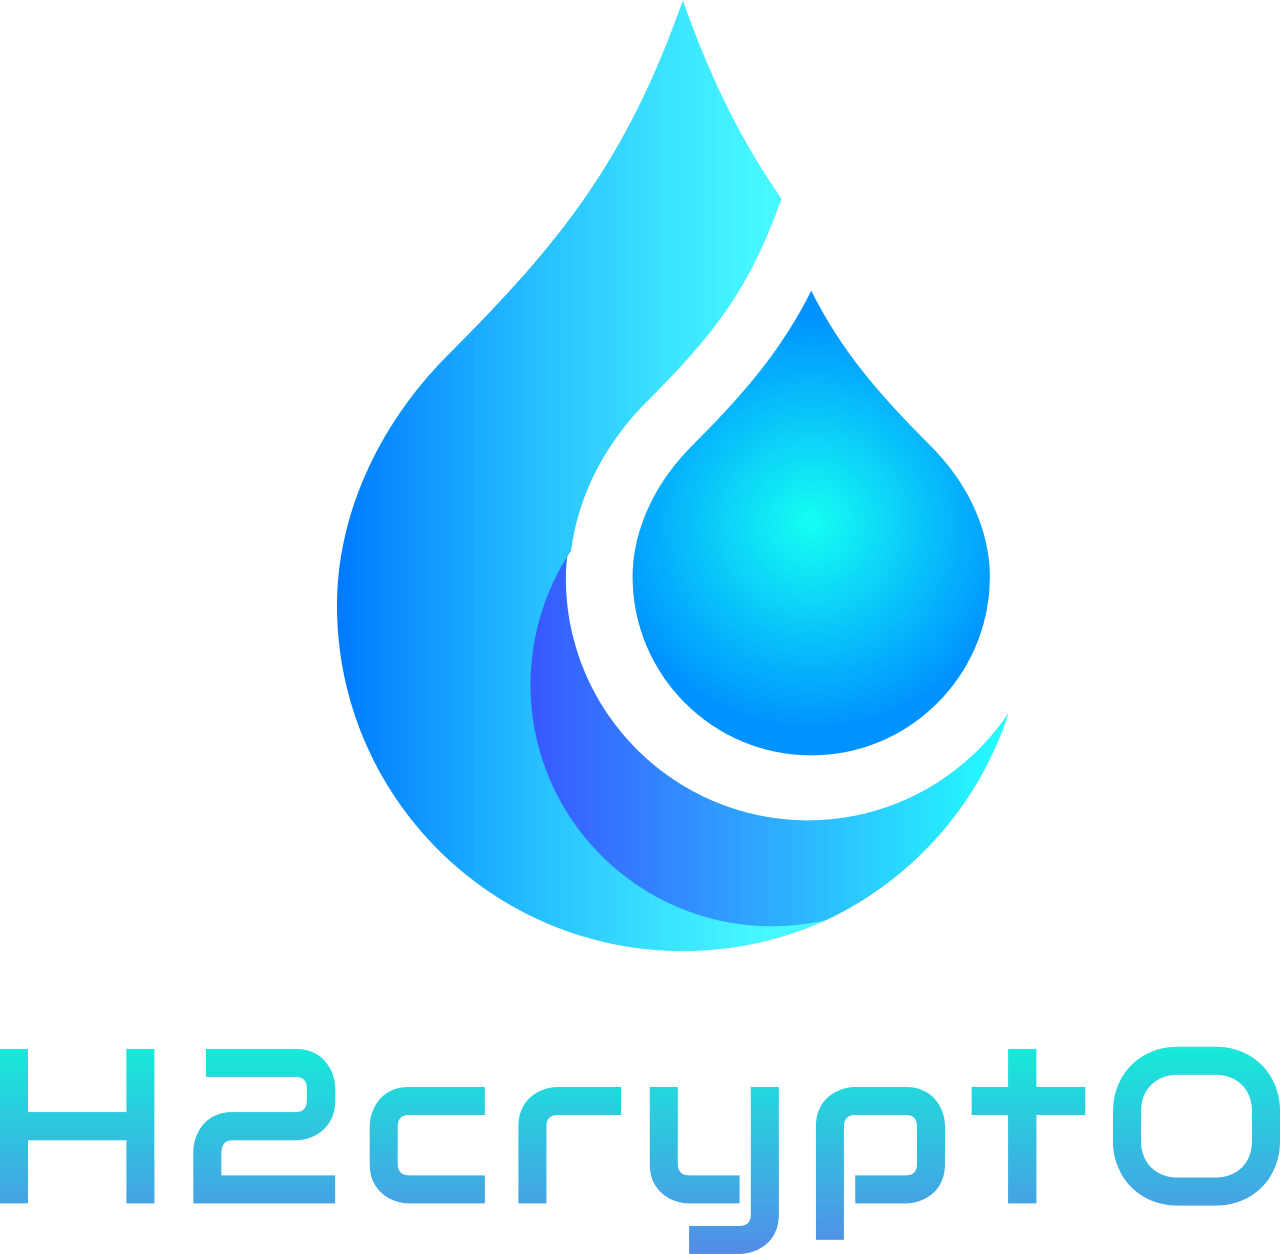 , H2cryptO and RoundlyX partnership brings passive investing to crypto.